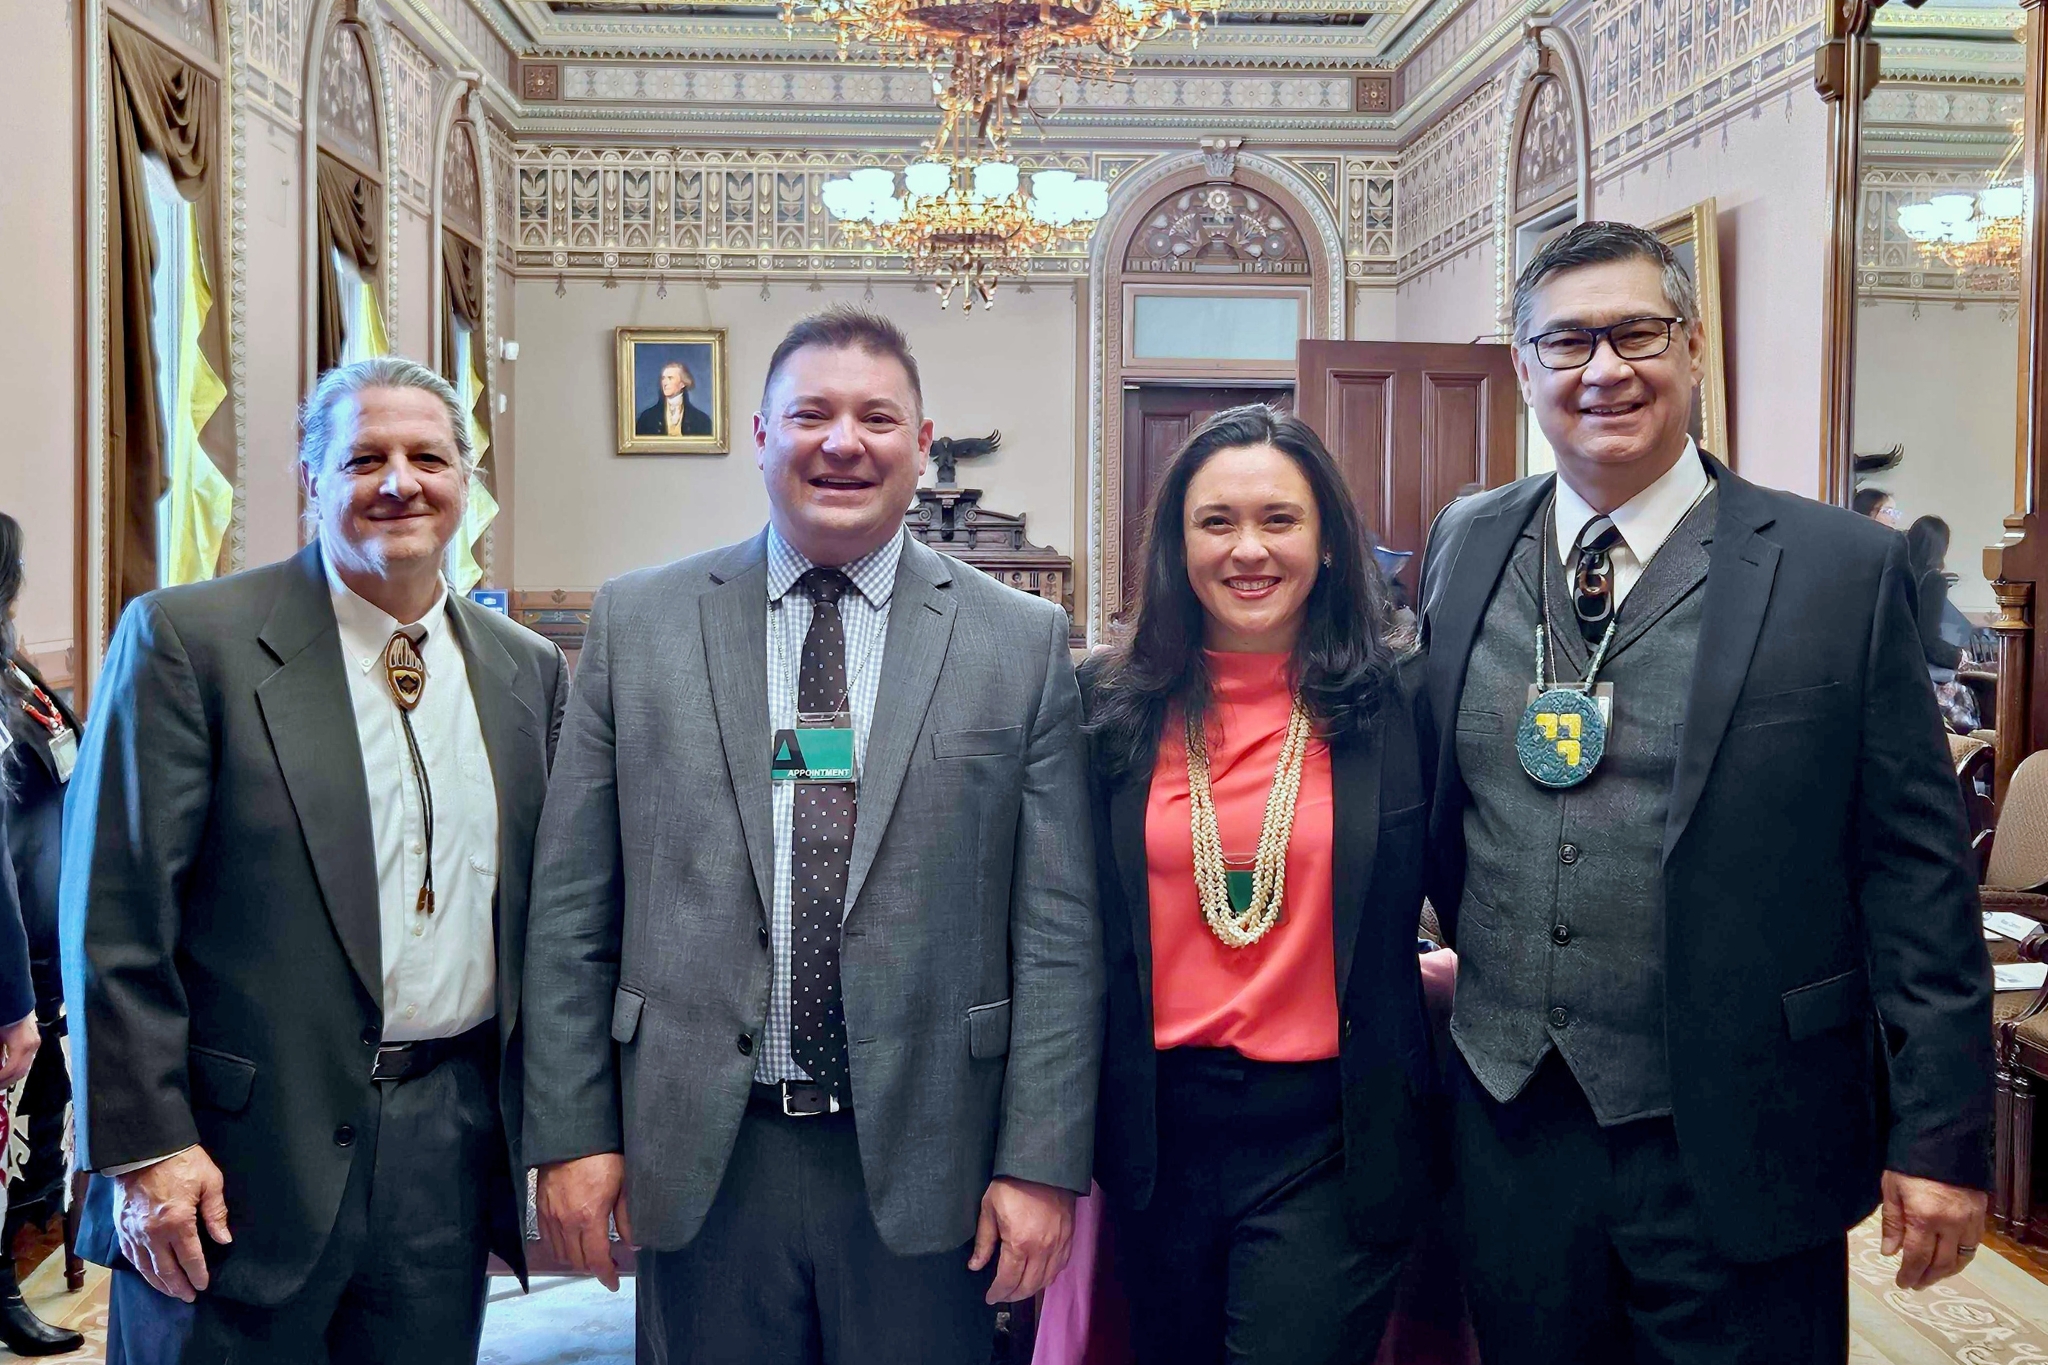 Four people in an ornate room smile into the camera. L–R: Dante Desiderio, Erik Stegman, Lauren Grattan, Ted Piccolo at the White House